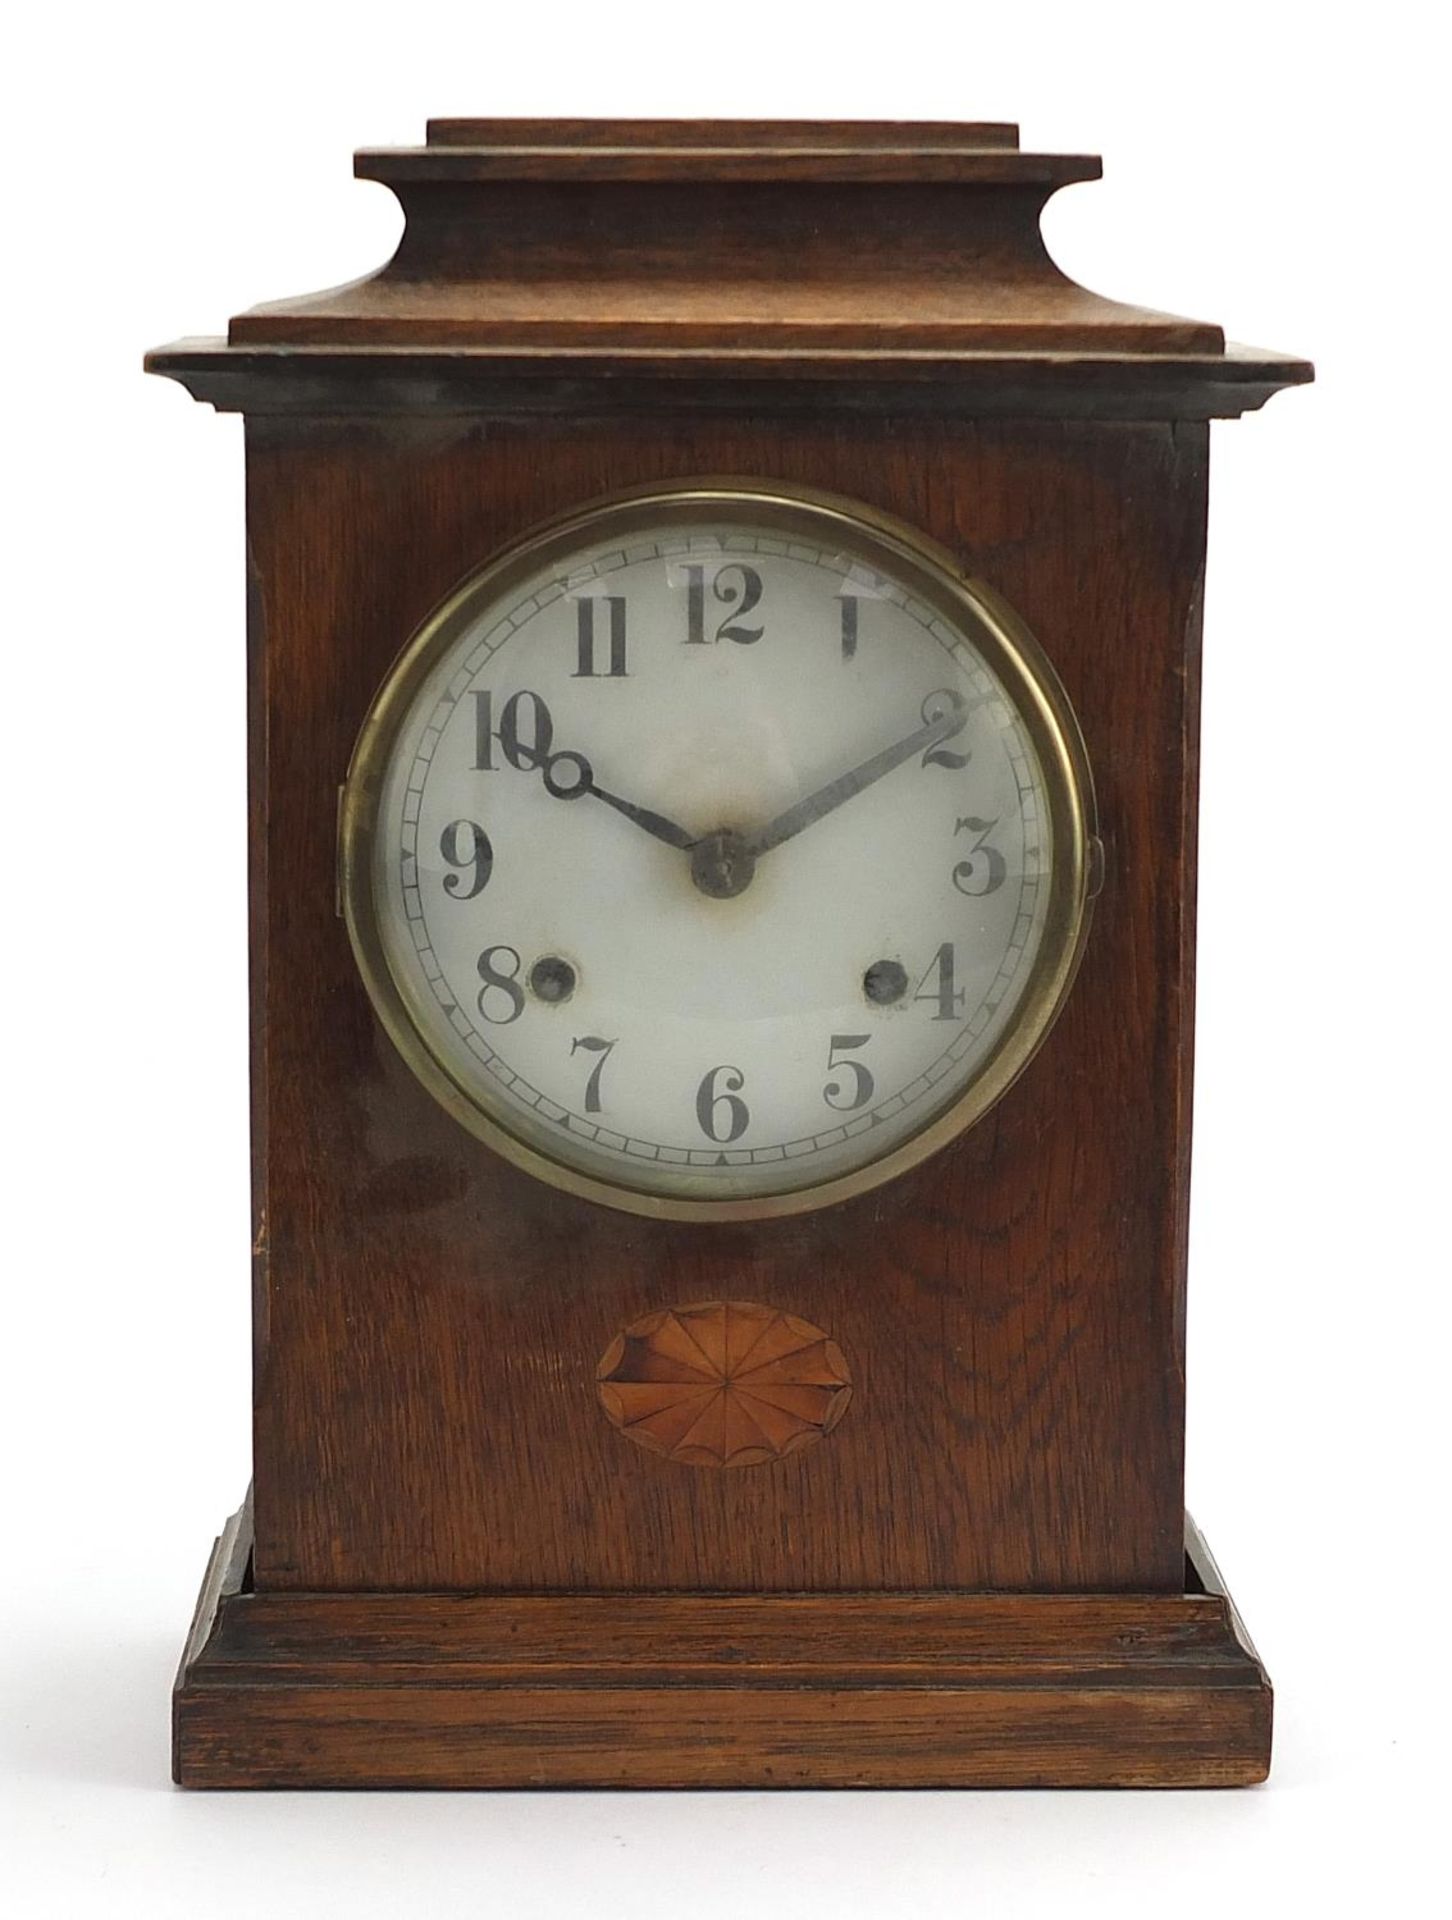 Edwardian inlaid oak mantle clock with painted dial having Arabic numerals, 34cm high - Image 2 of 6